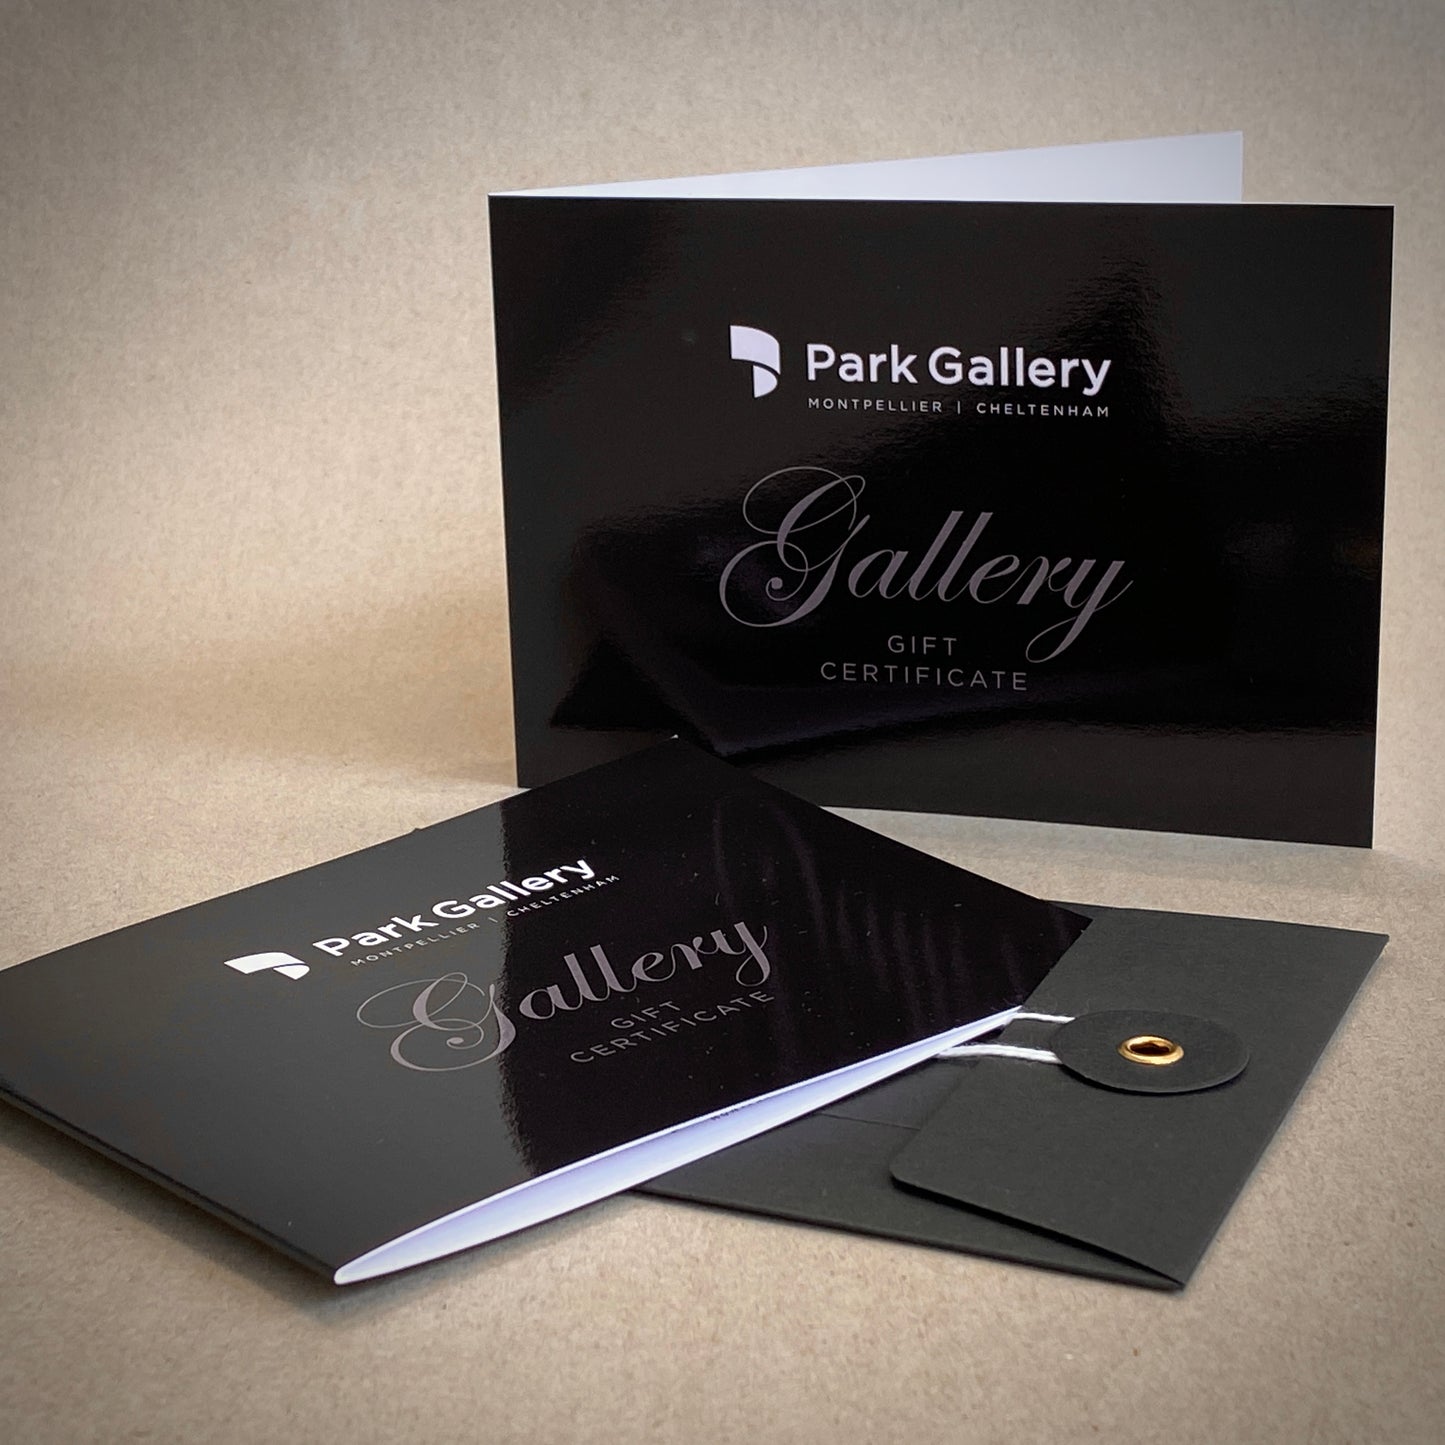 Park Gallery Gift Card